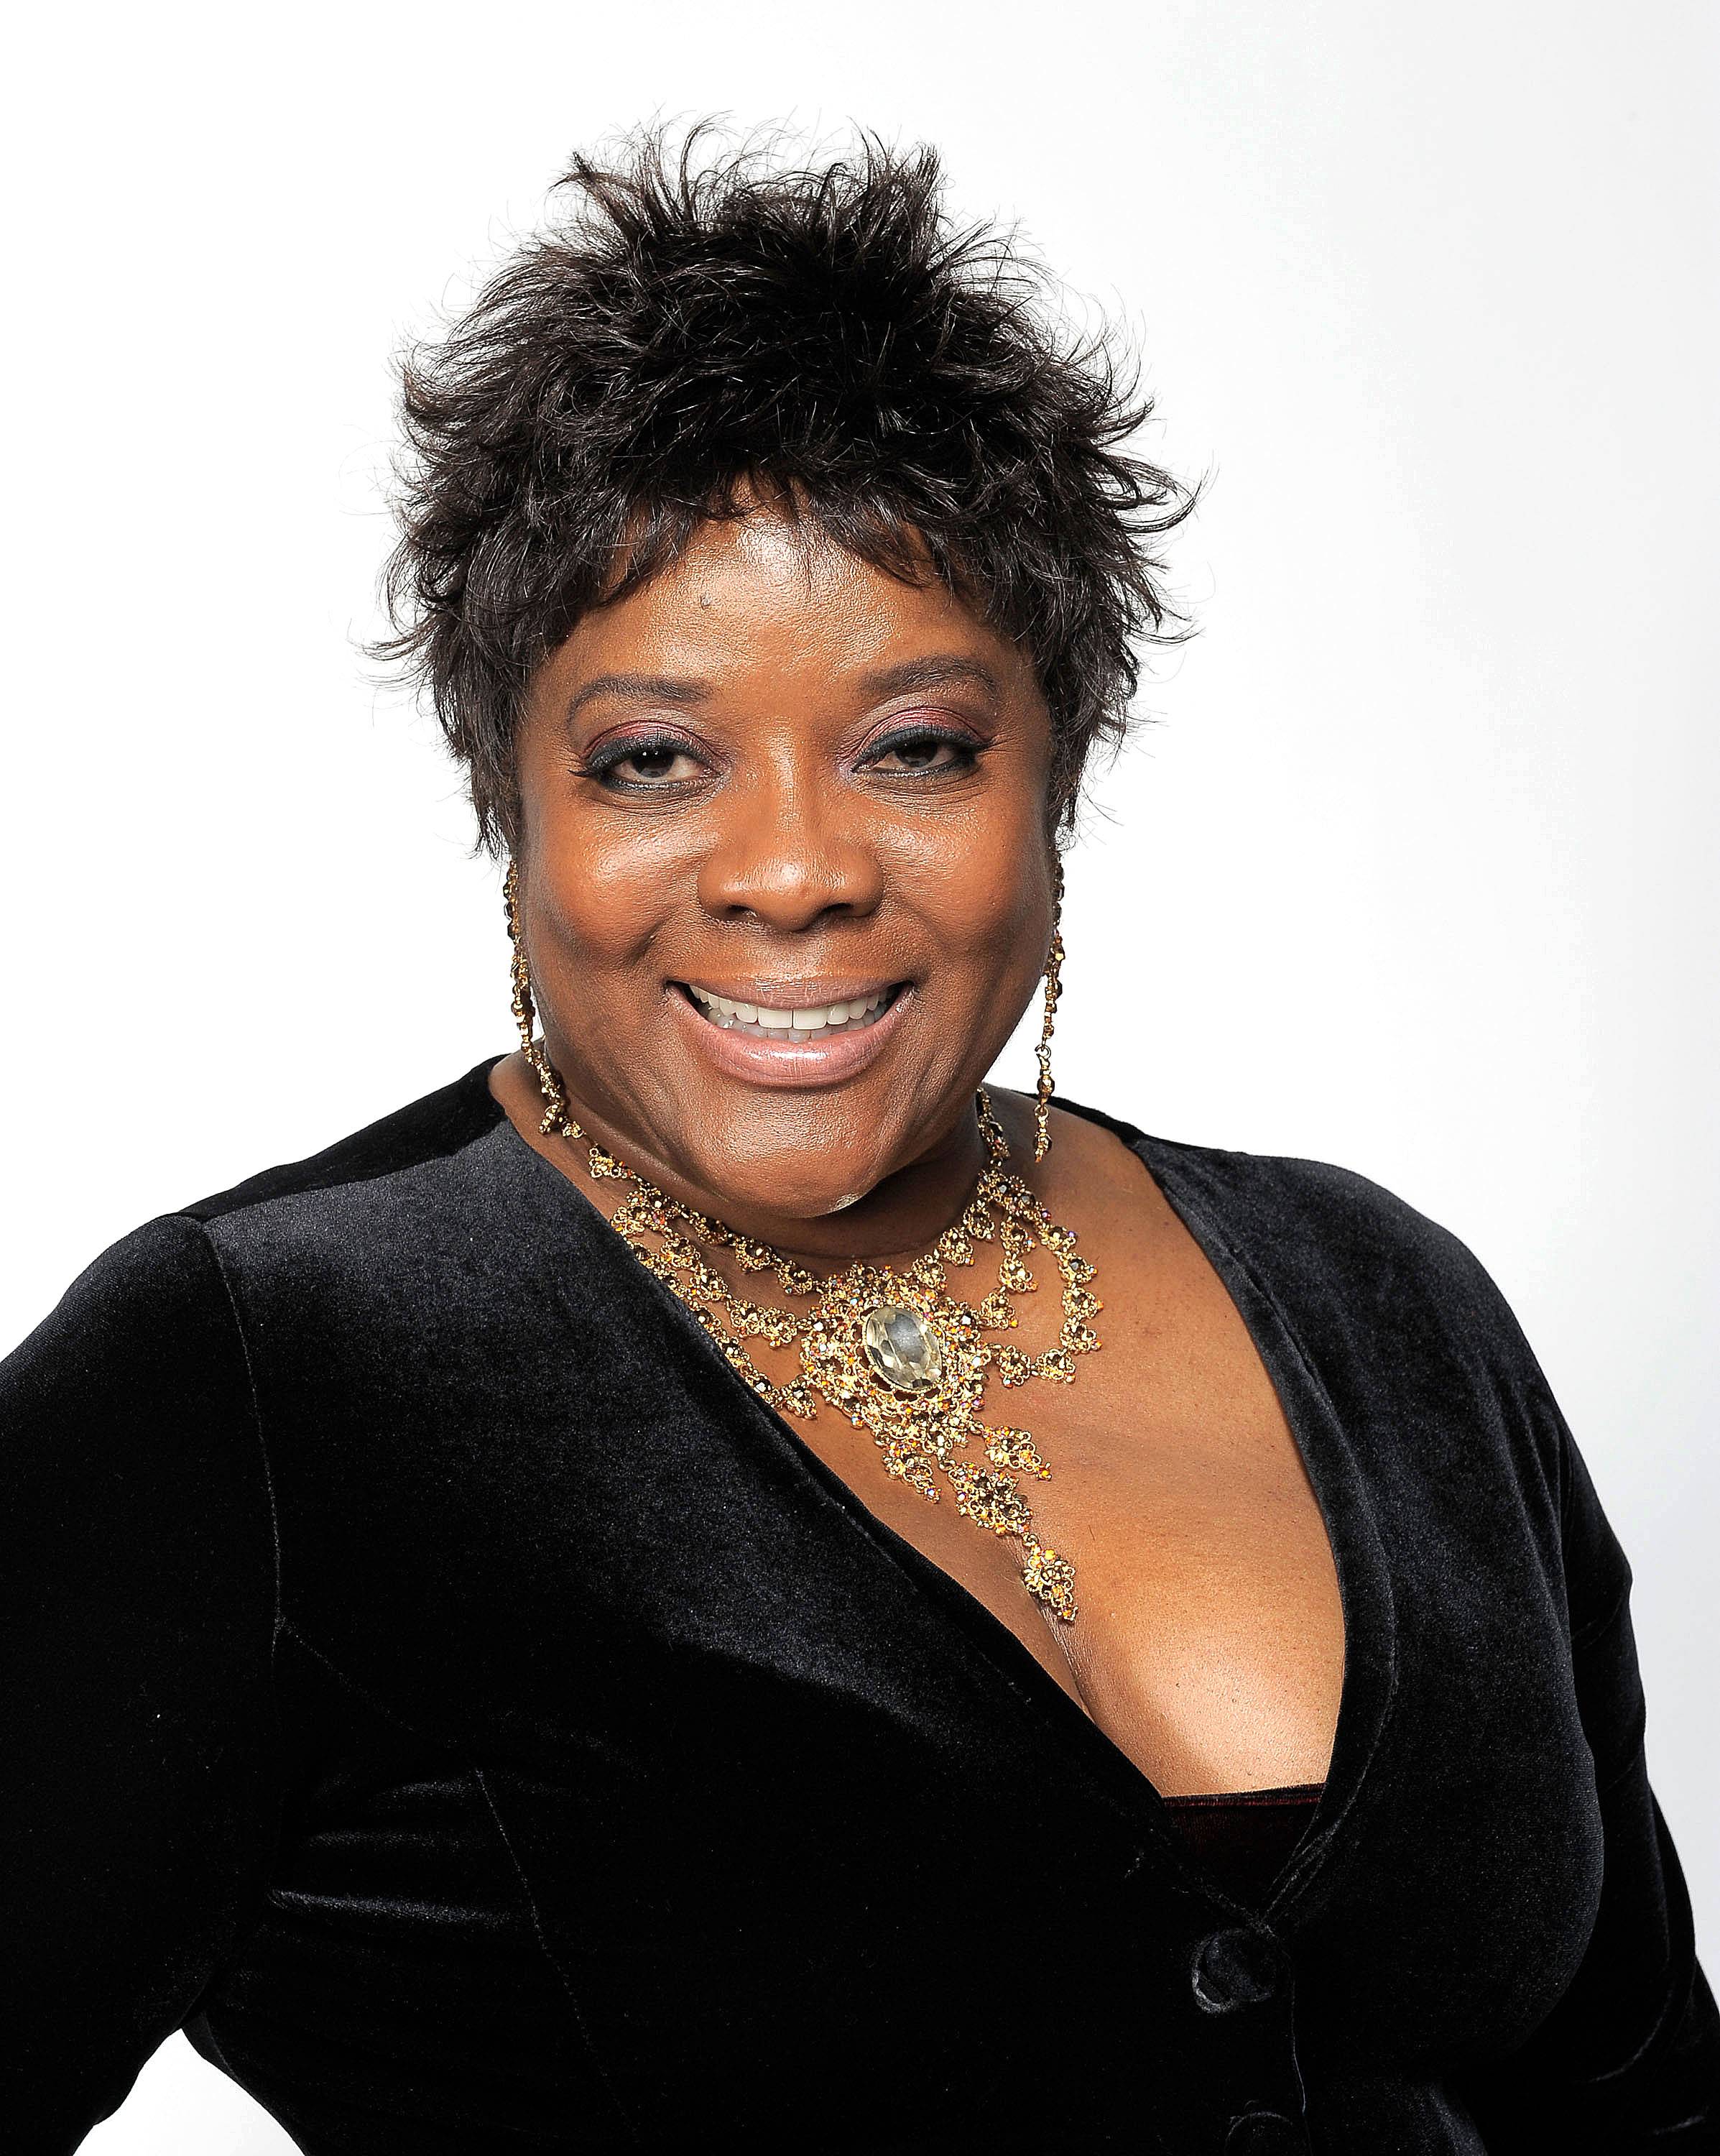 Loretta Devine\r - With over 30 years in the entertainment business and appearances in over 50 stage plays, films and TV shows combined, it's needless to say that Loretta Devine has no problem remaining relevant. BET Star Cinema takes a look at some of her most notable moments on the big and small screens.\r&nbsp;\r(Photo: Charley Gallay/Getty Images for NAACP Image Awards)